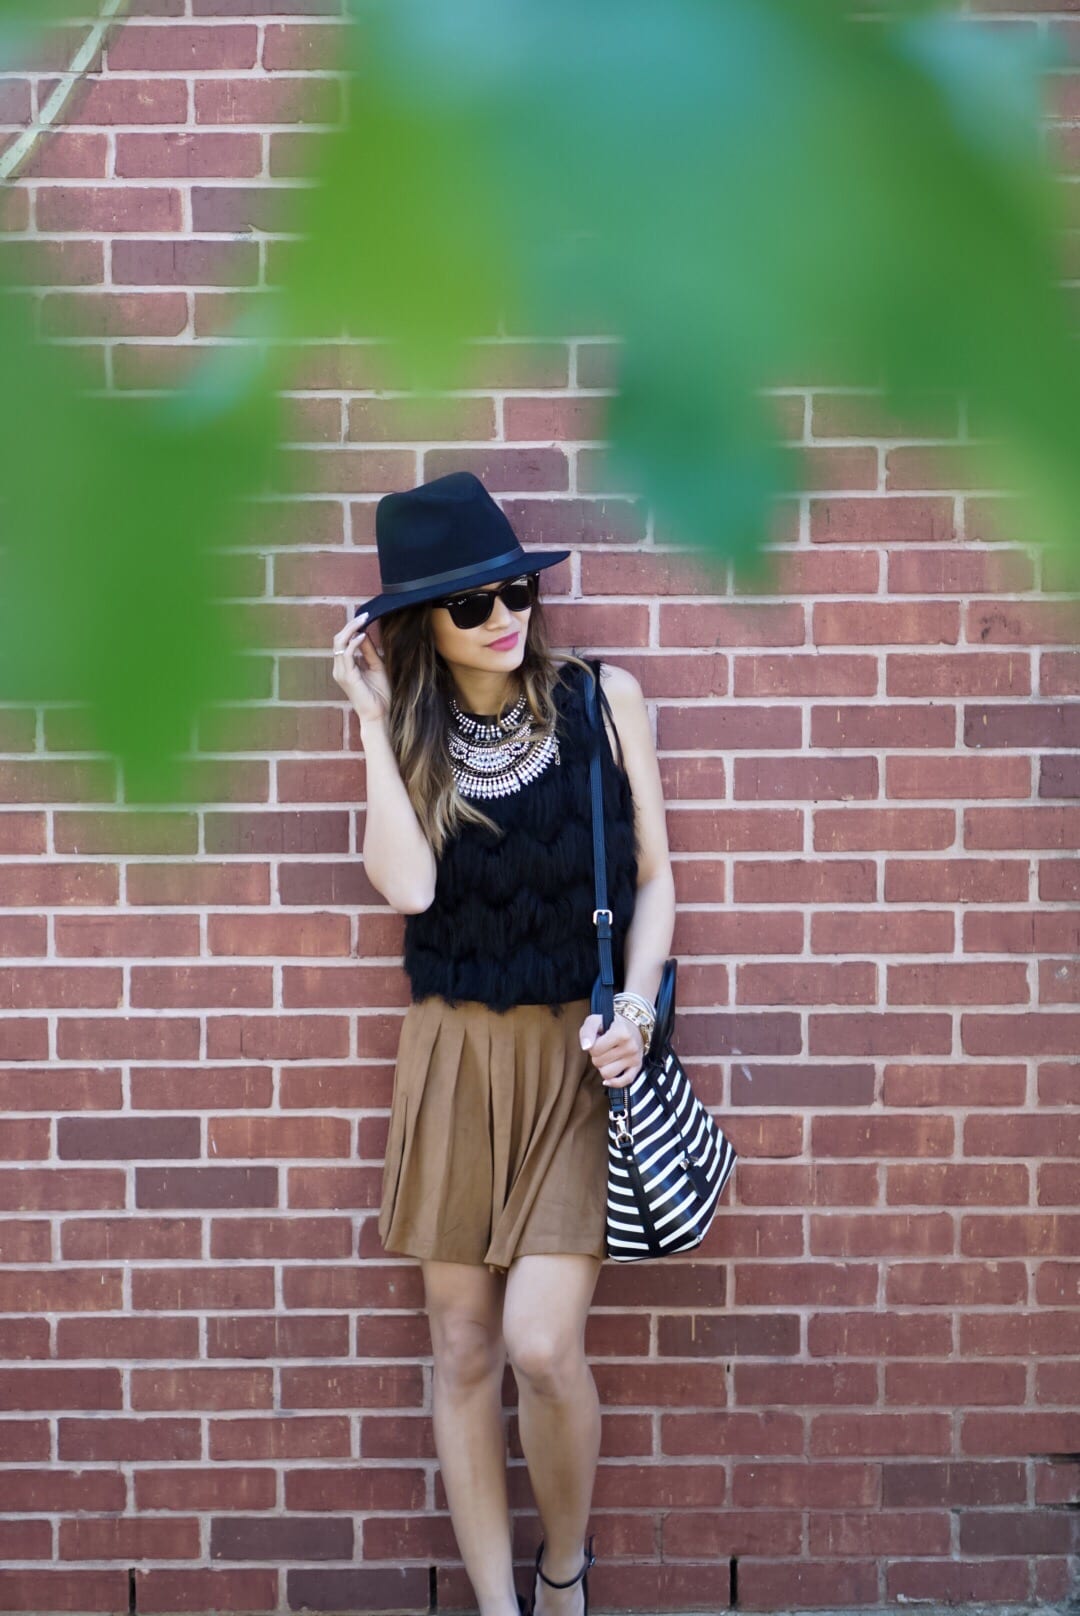 City Chic - Suede Skirt and Fringe Top